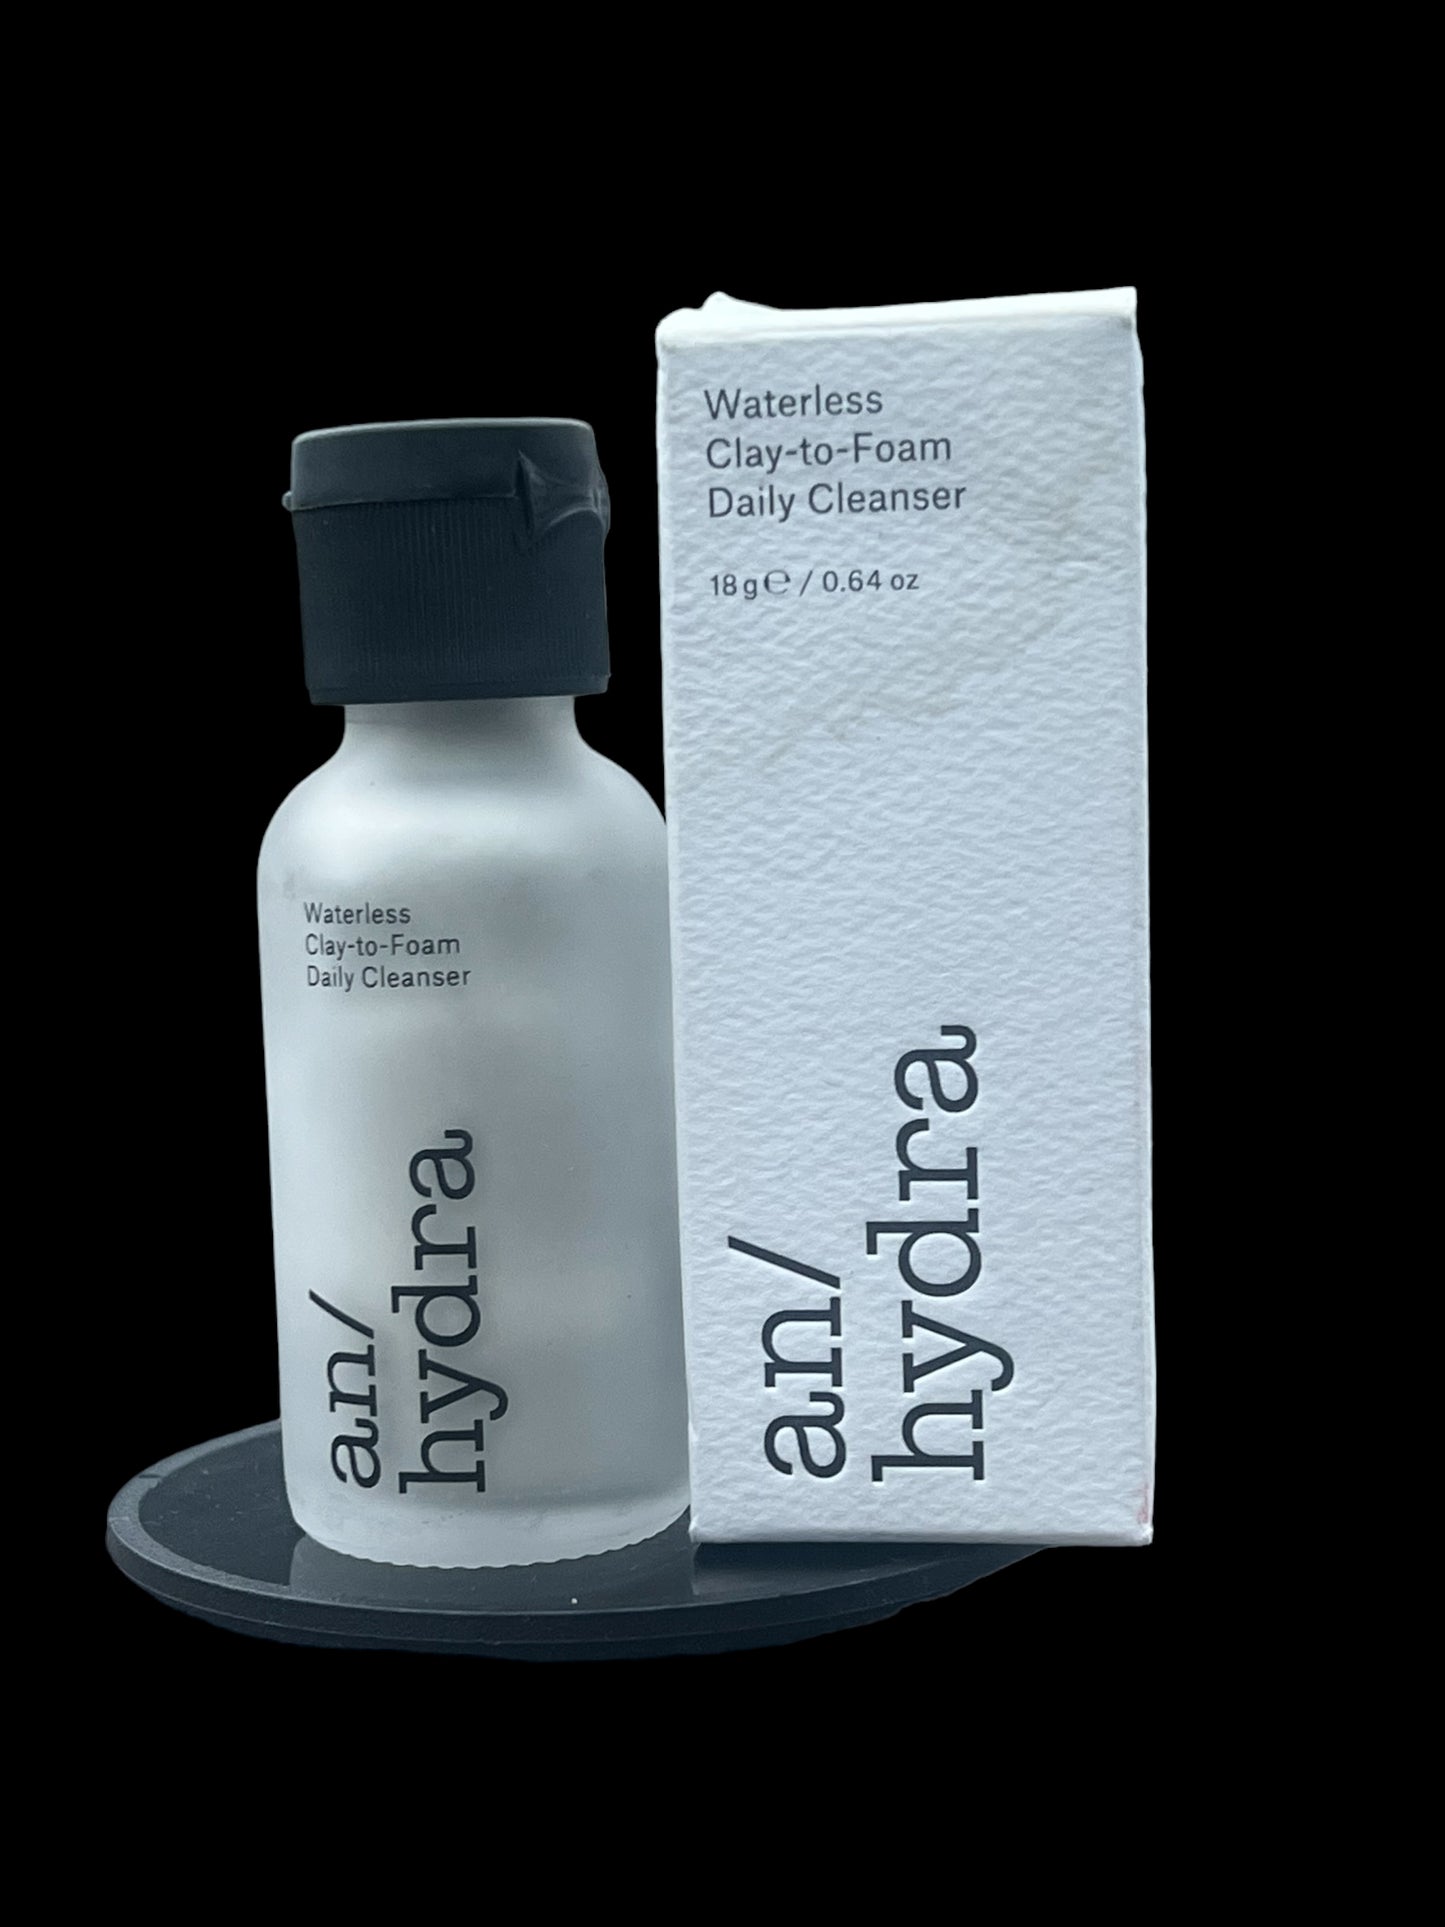 Waterless Clay to Foam Daily Cleanser